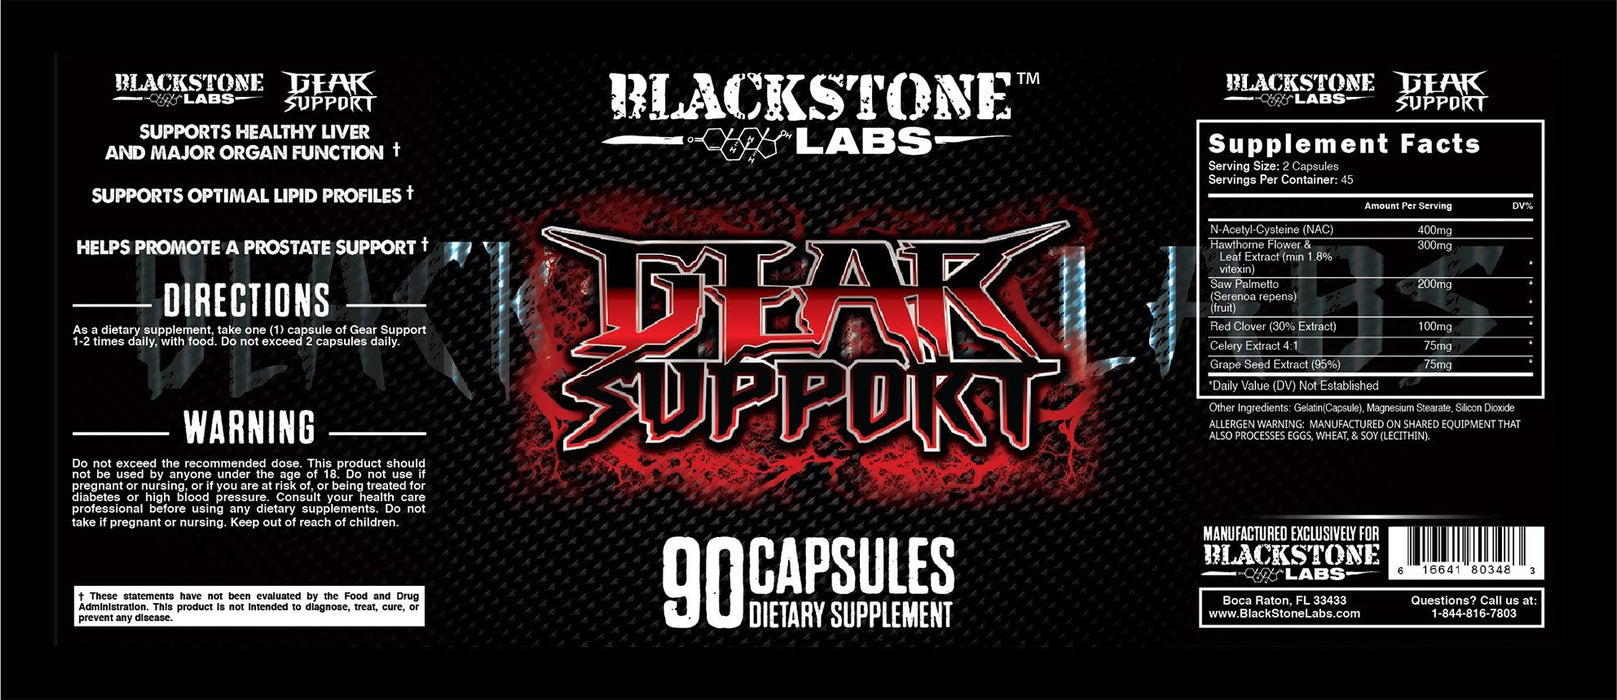 Full view of Blackstone Labs Gear Support Label.